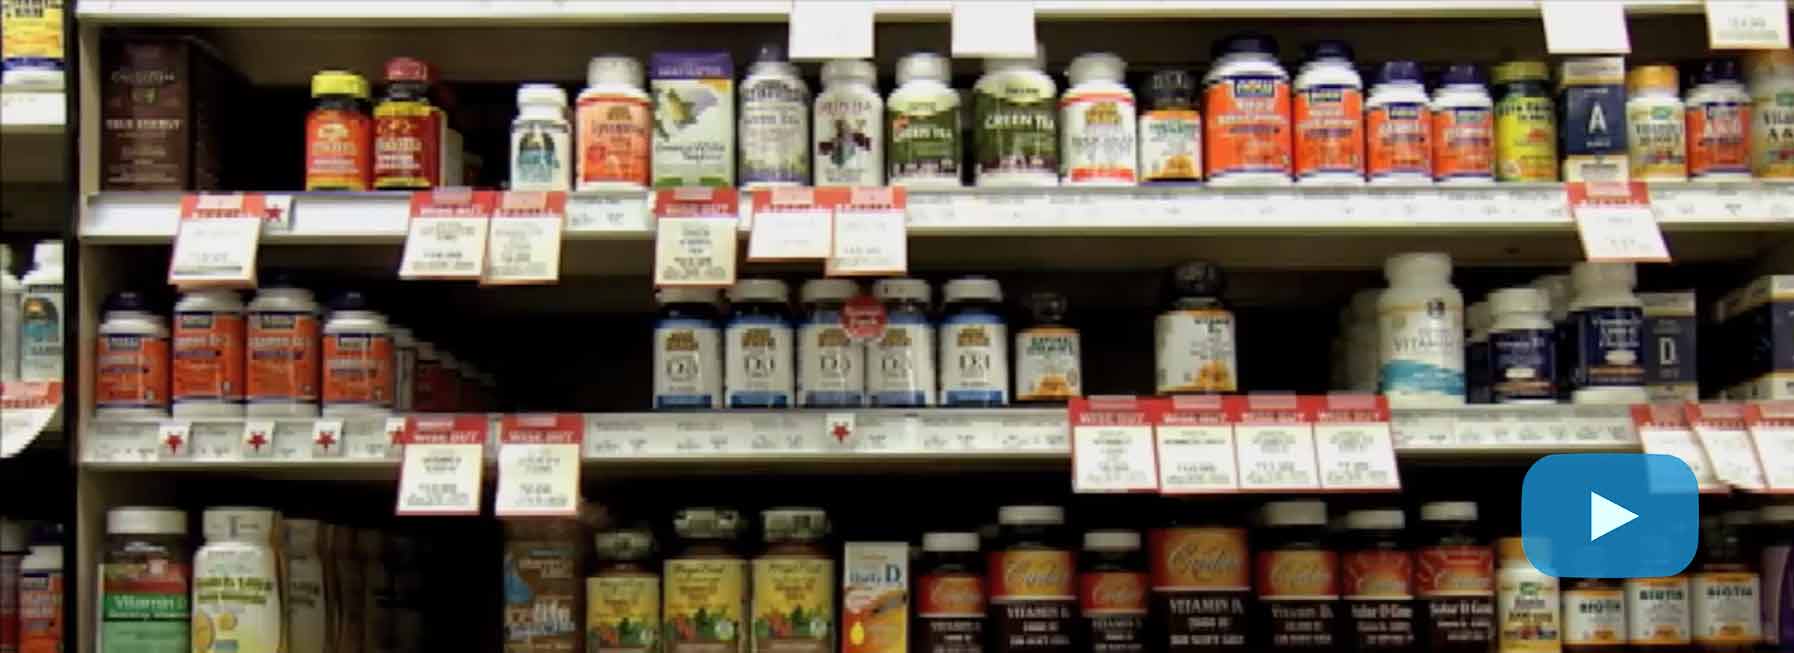 Vitamin D Potency Varies Widely in Dietary Supplements